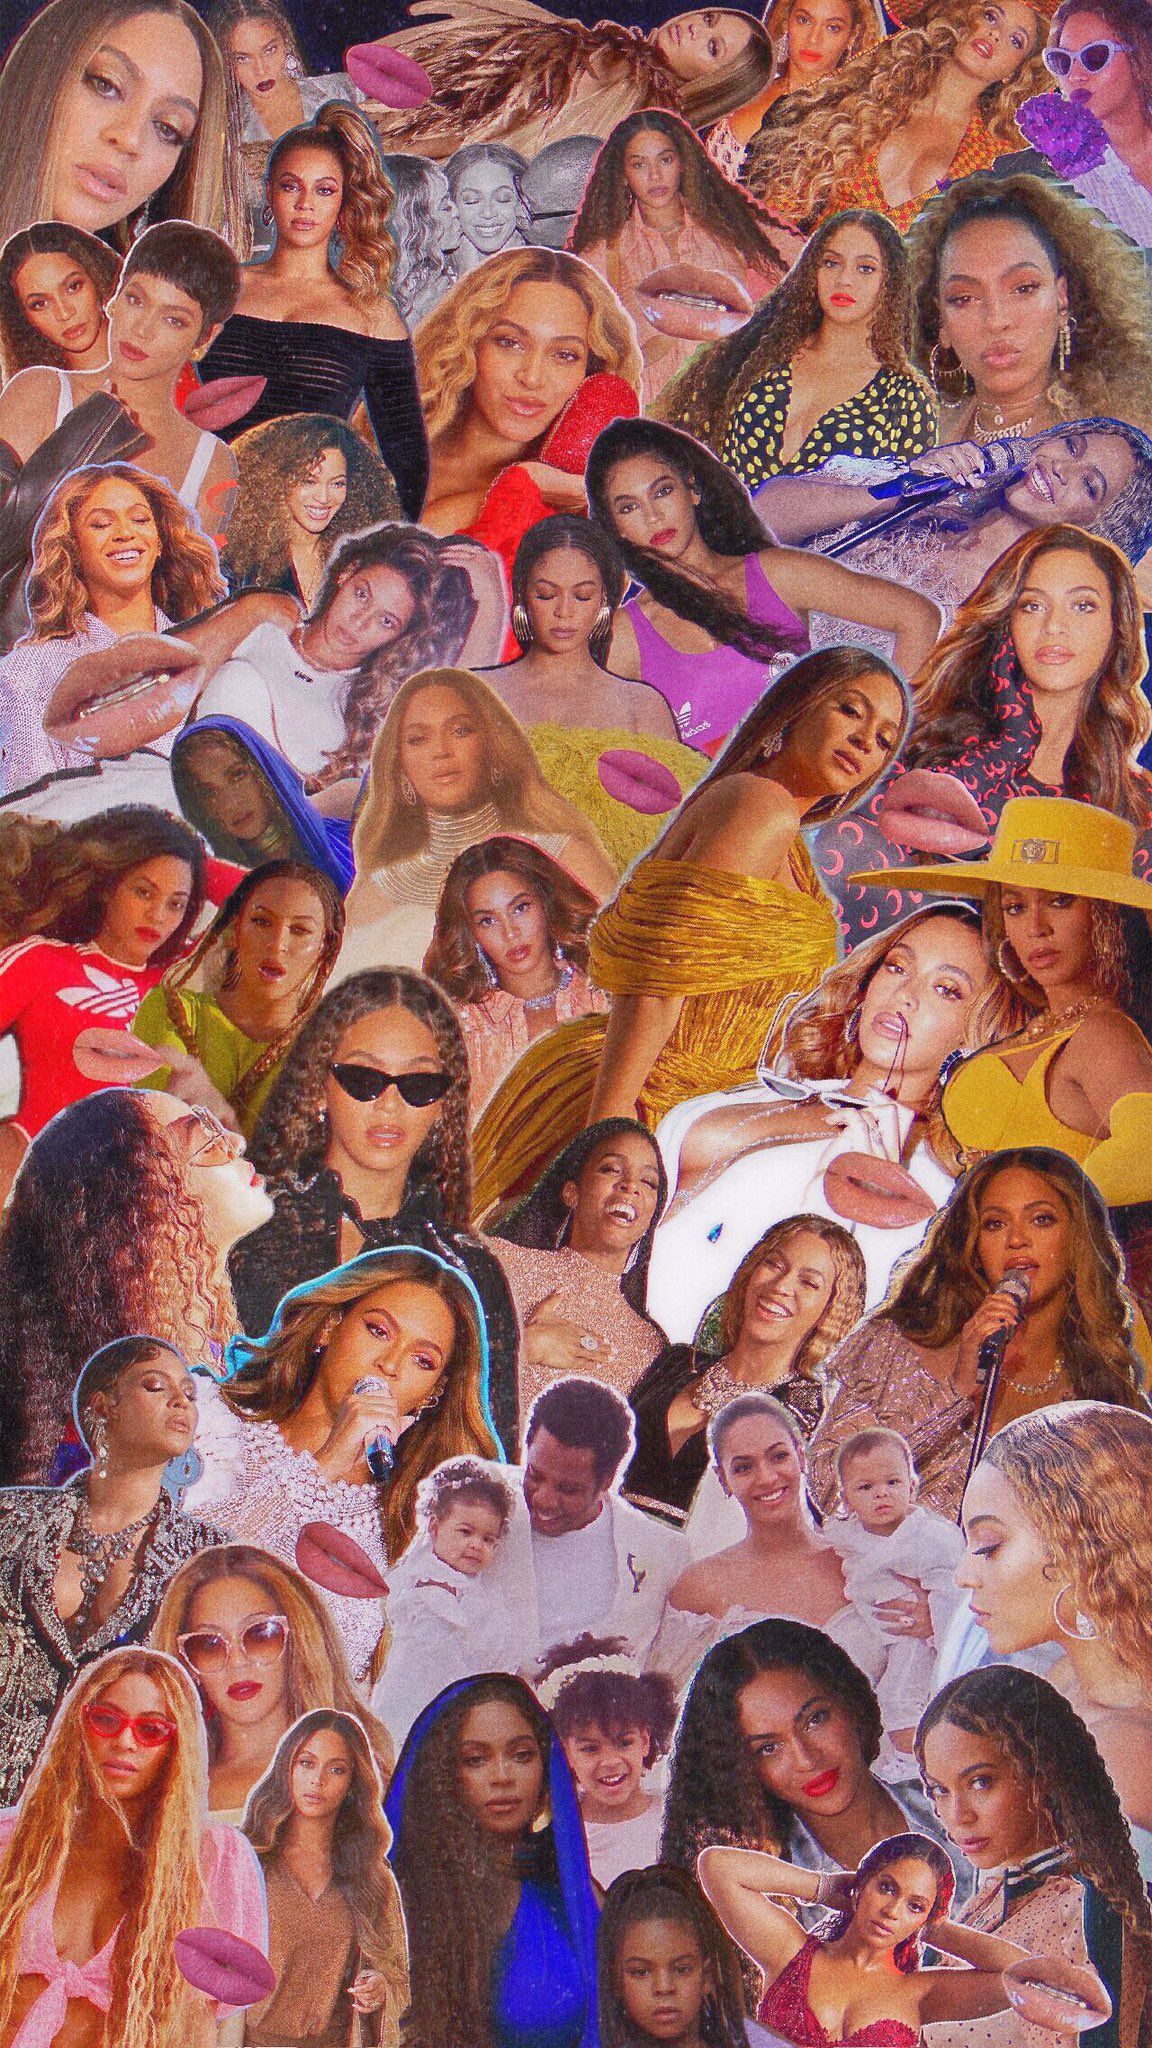 A collage of Beyoncé's many looks throughout her career. - Beyonce